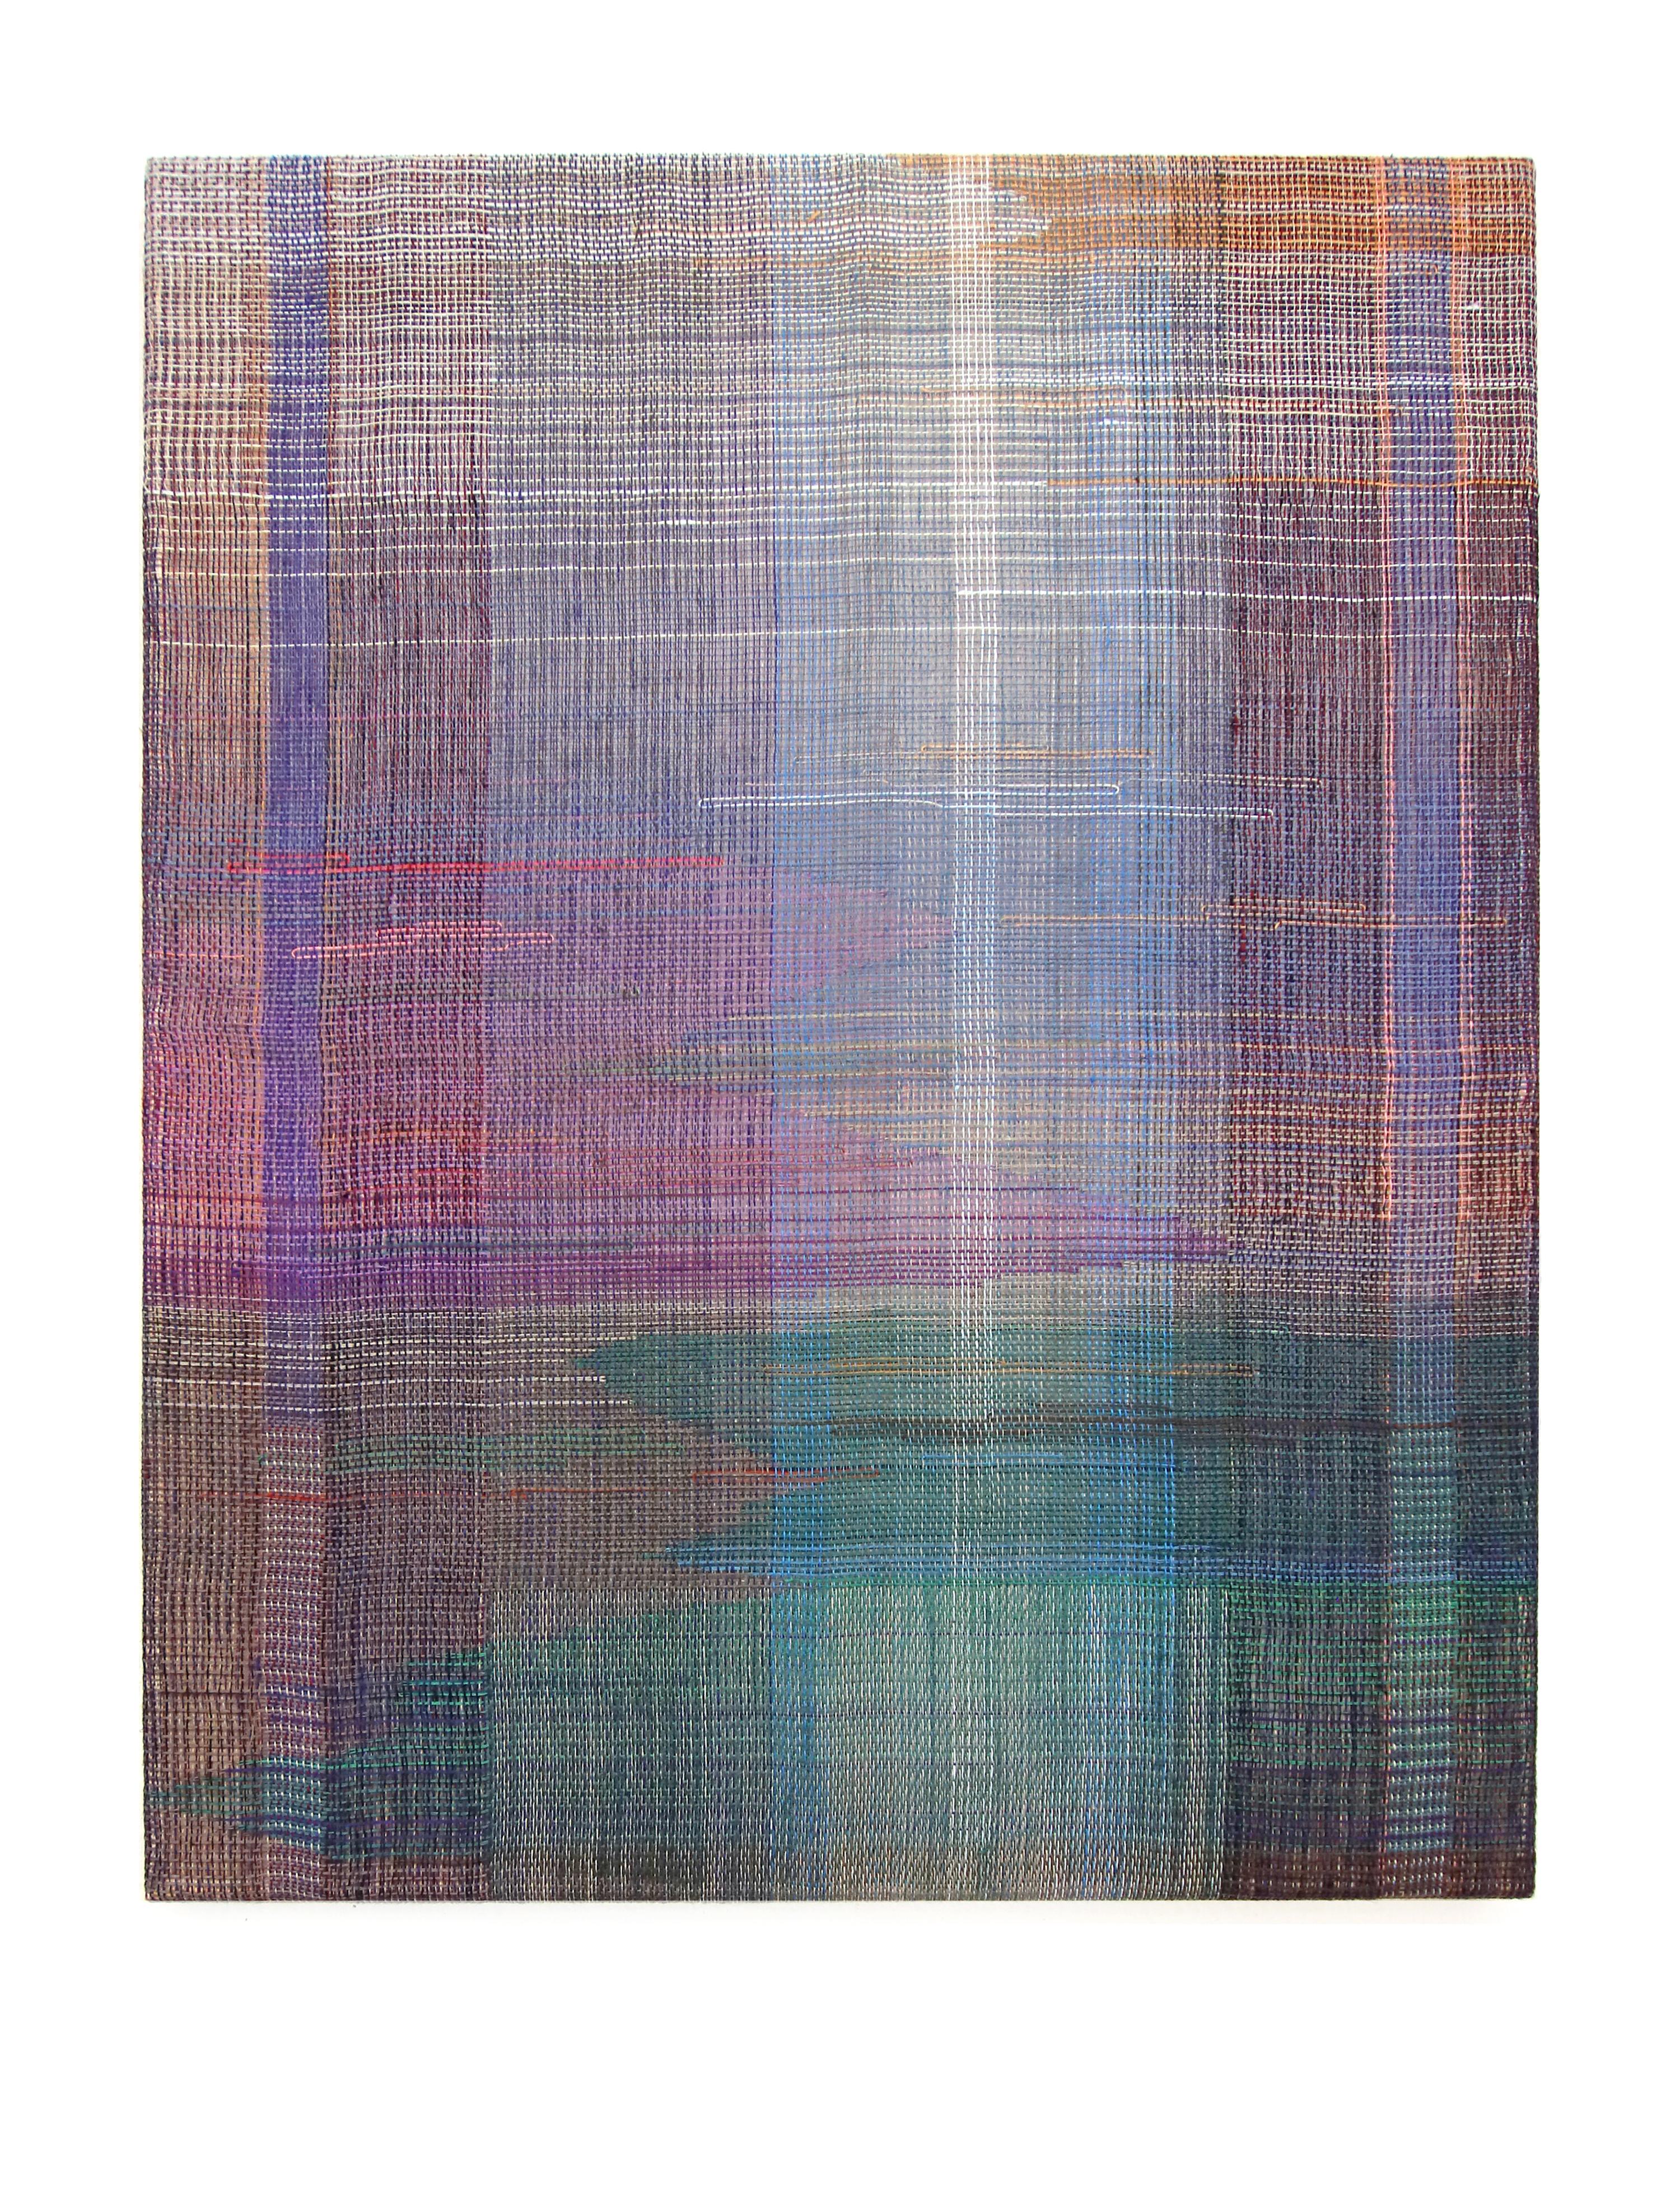 In Between Words III, Abstract Landscape, Contemporary Woven and Painted Artwork